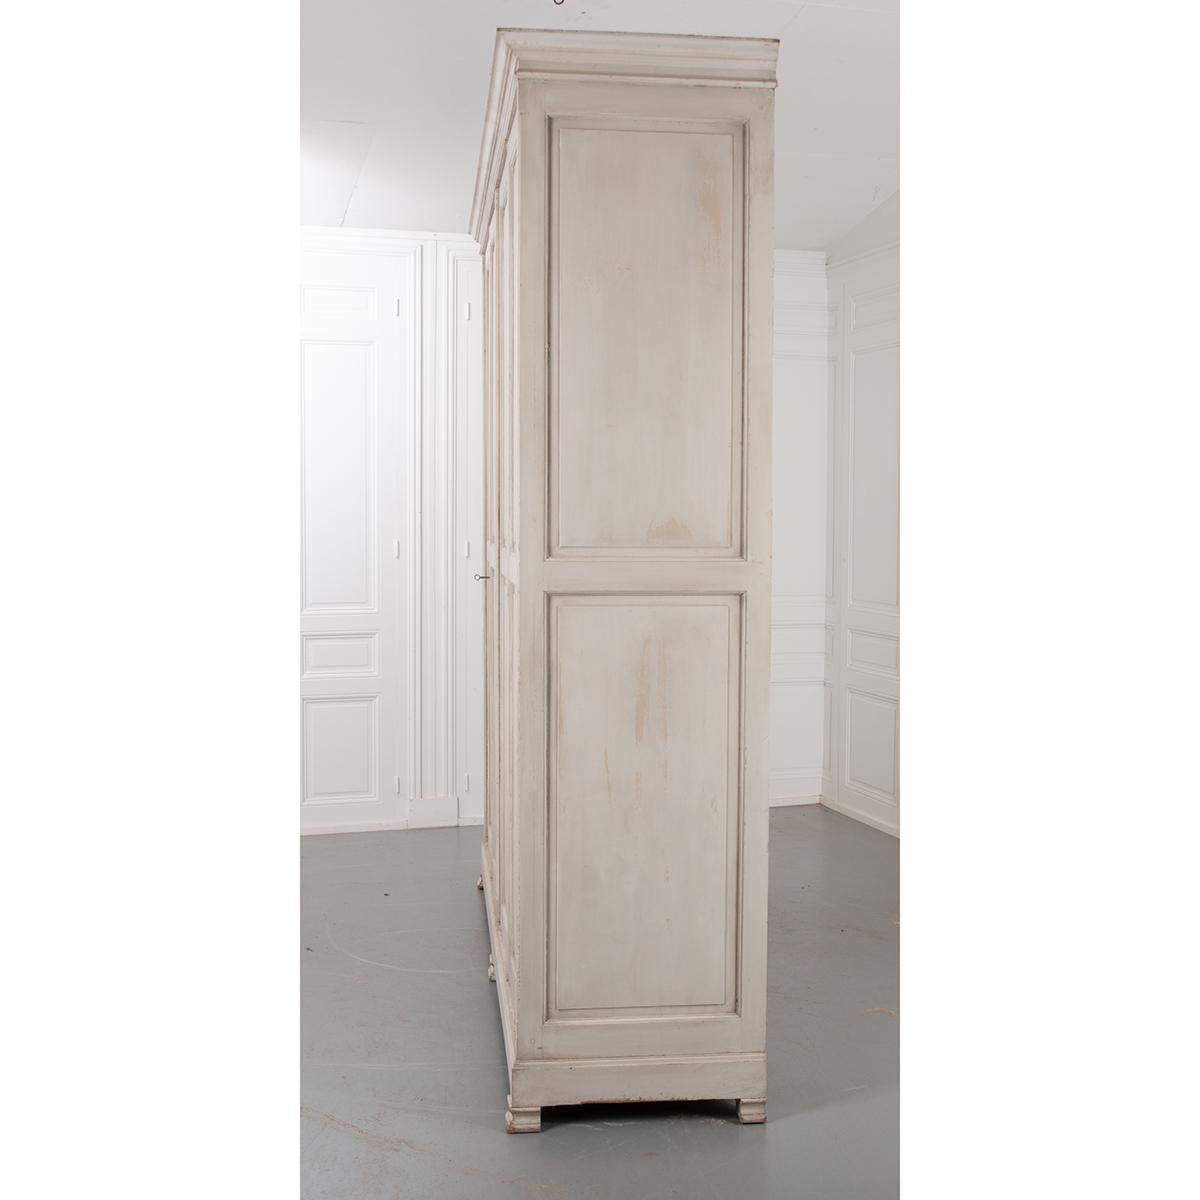 This is a wonderful four door French 19th century painted pine wardrobe. It is painted in an appealing soft, more recent, gray-green finish. The piece has nice simple straight lines with a cornice across the top of the piece. It has three bracket